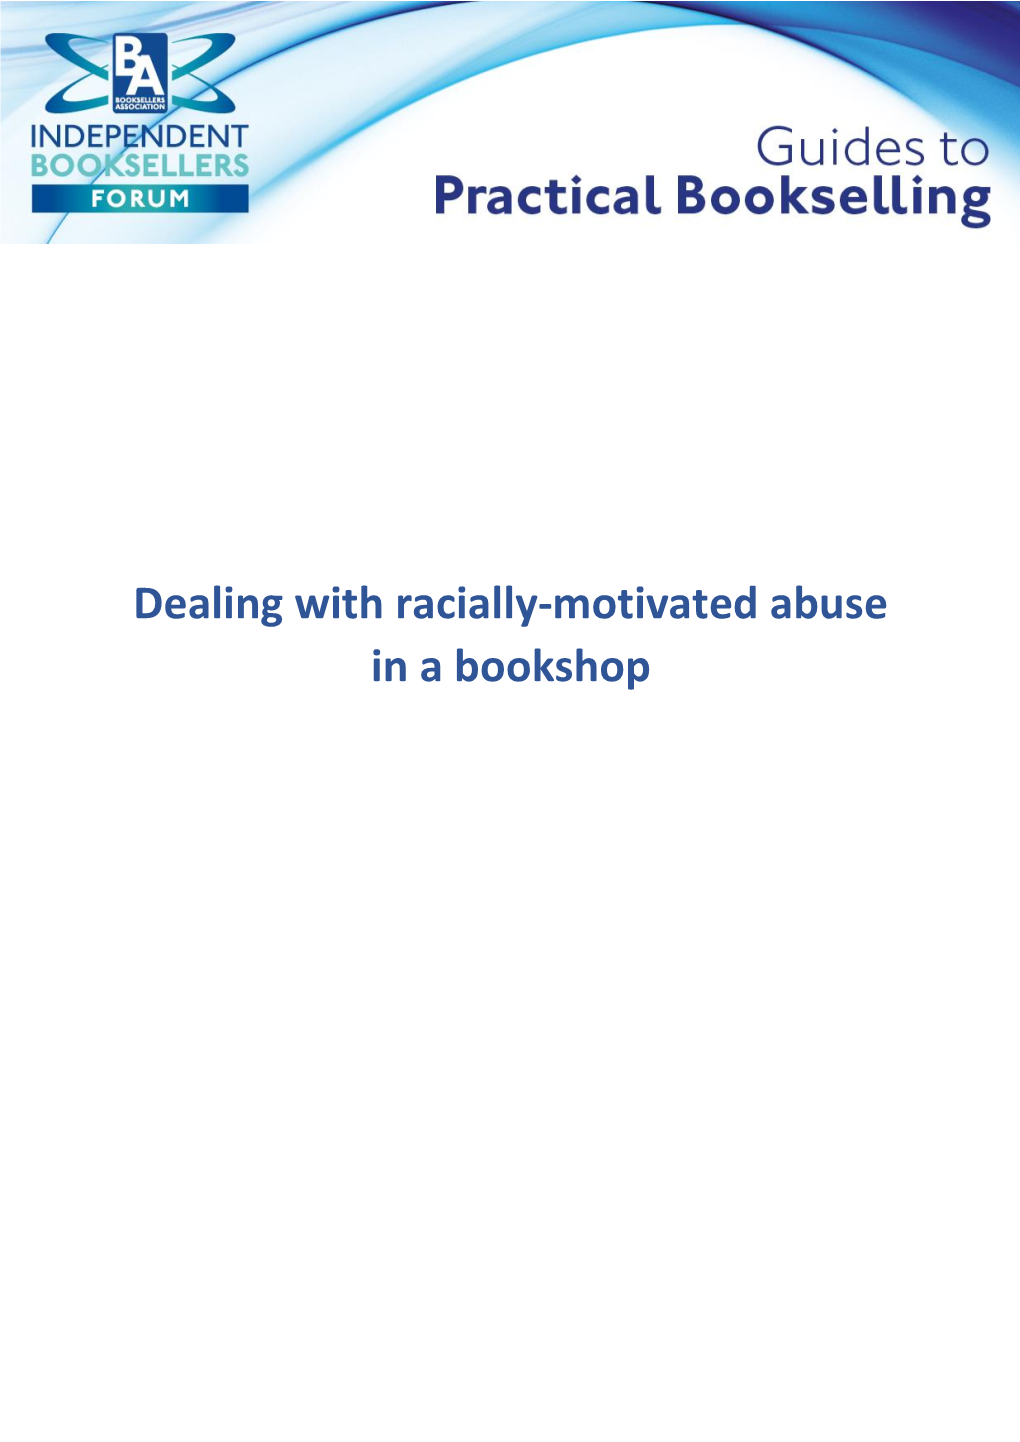 Dealing with Racially-Motivated Abuse in a Bookshop